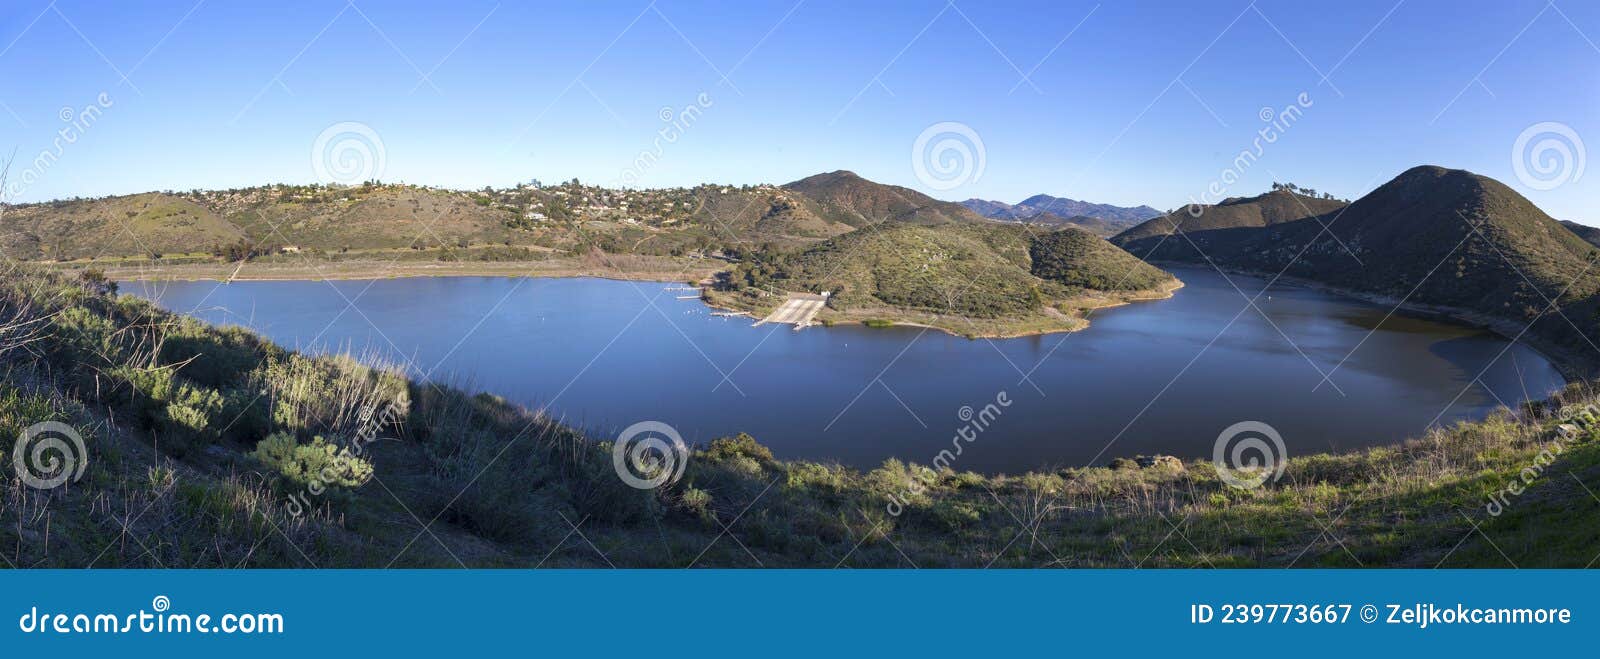 lake hodges panoramic landscape from fletcher point in san dieguito river park